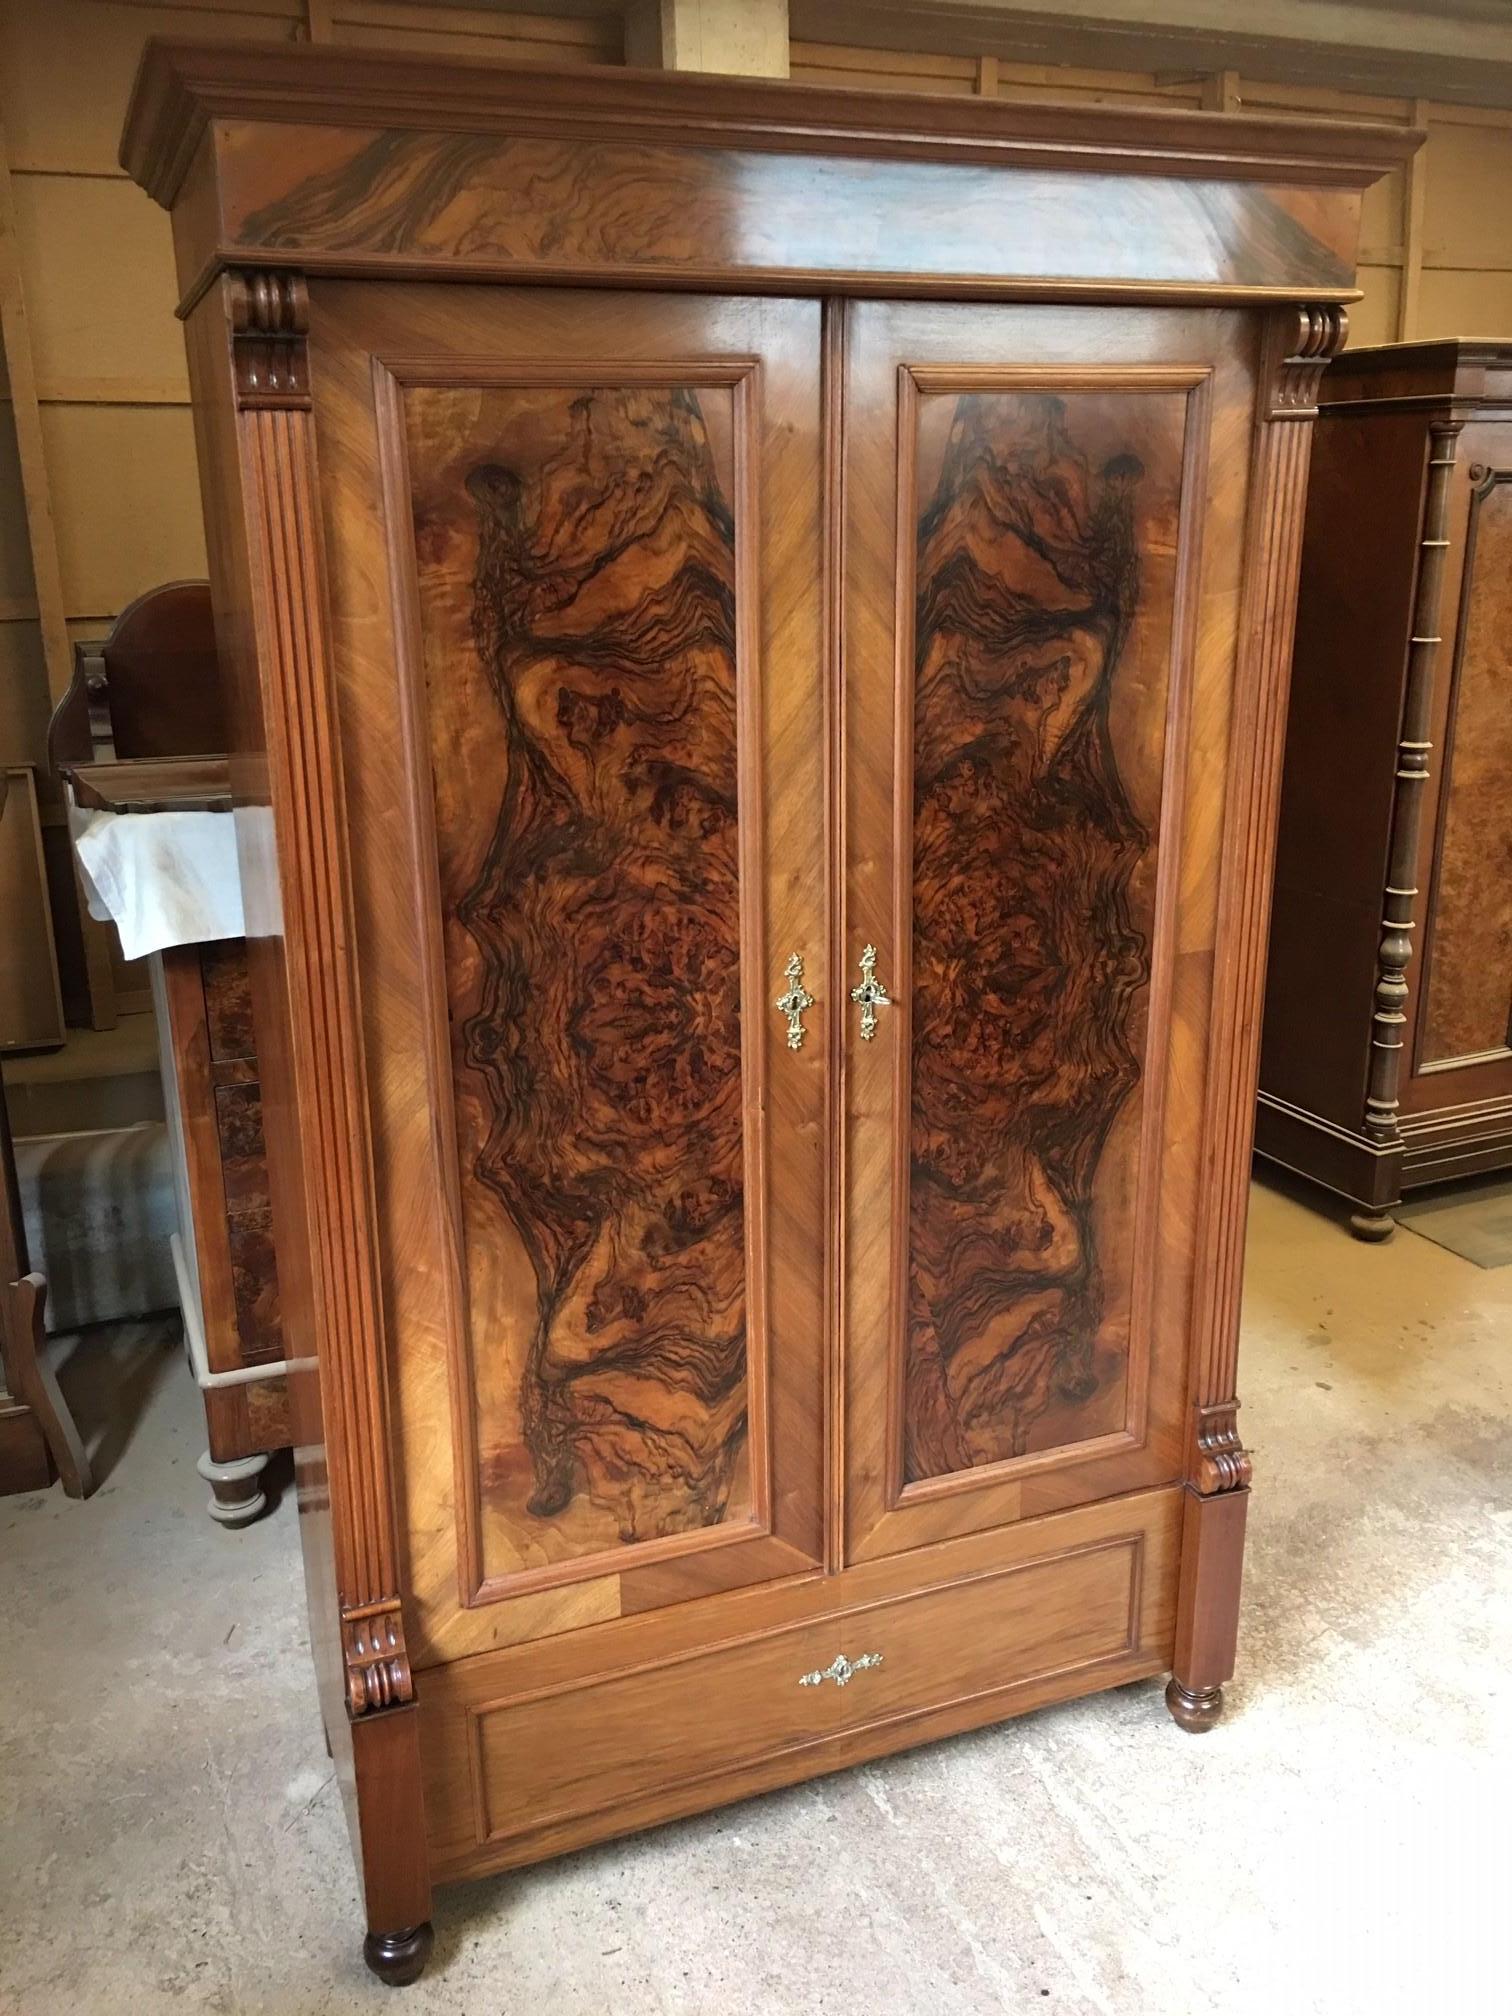 Amazing Gründerzeit cabinet made of stunning walnut burl wood. This 1880s masterpiece from Bonn, Germany was crafted with plenty attention to detail and got restored by our experts by hand with shellac lacquer in a lot of hours of work. The cabinet